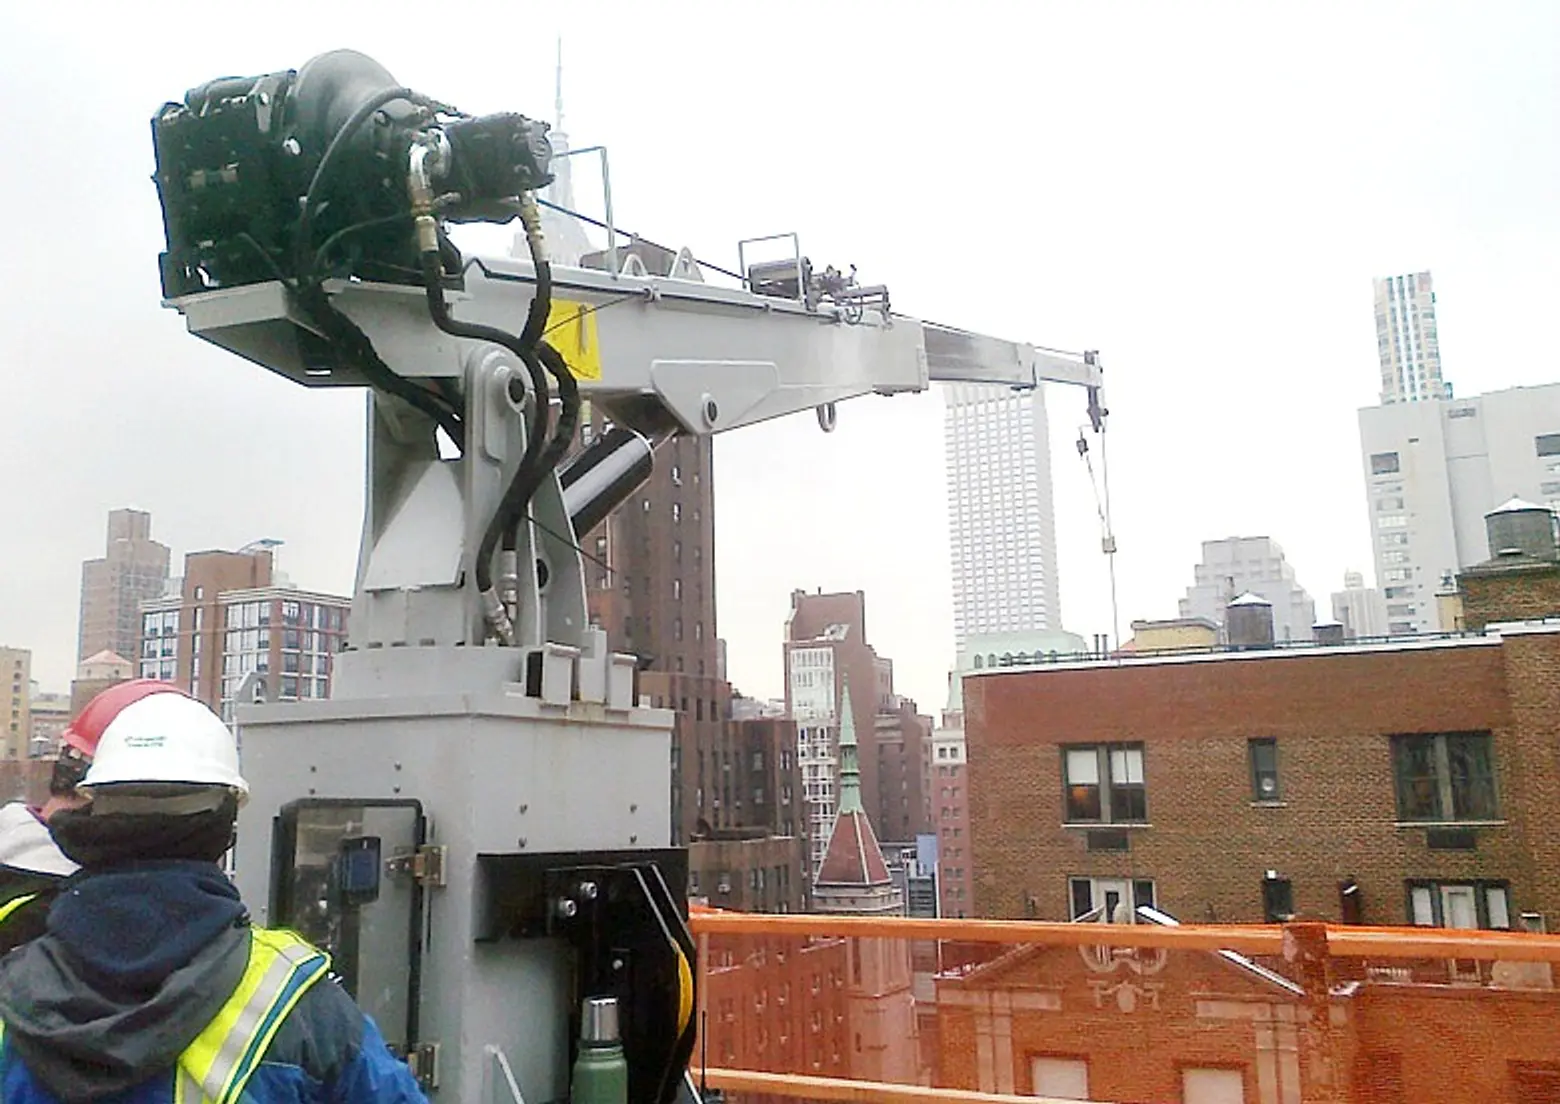 Safer and Smaller Crane Could Cut Building Costs by Millions, But the City Doesn’t Allow Use